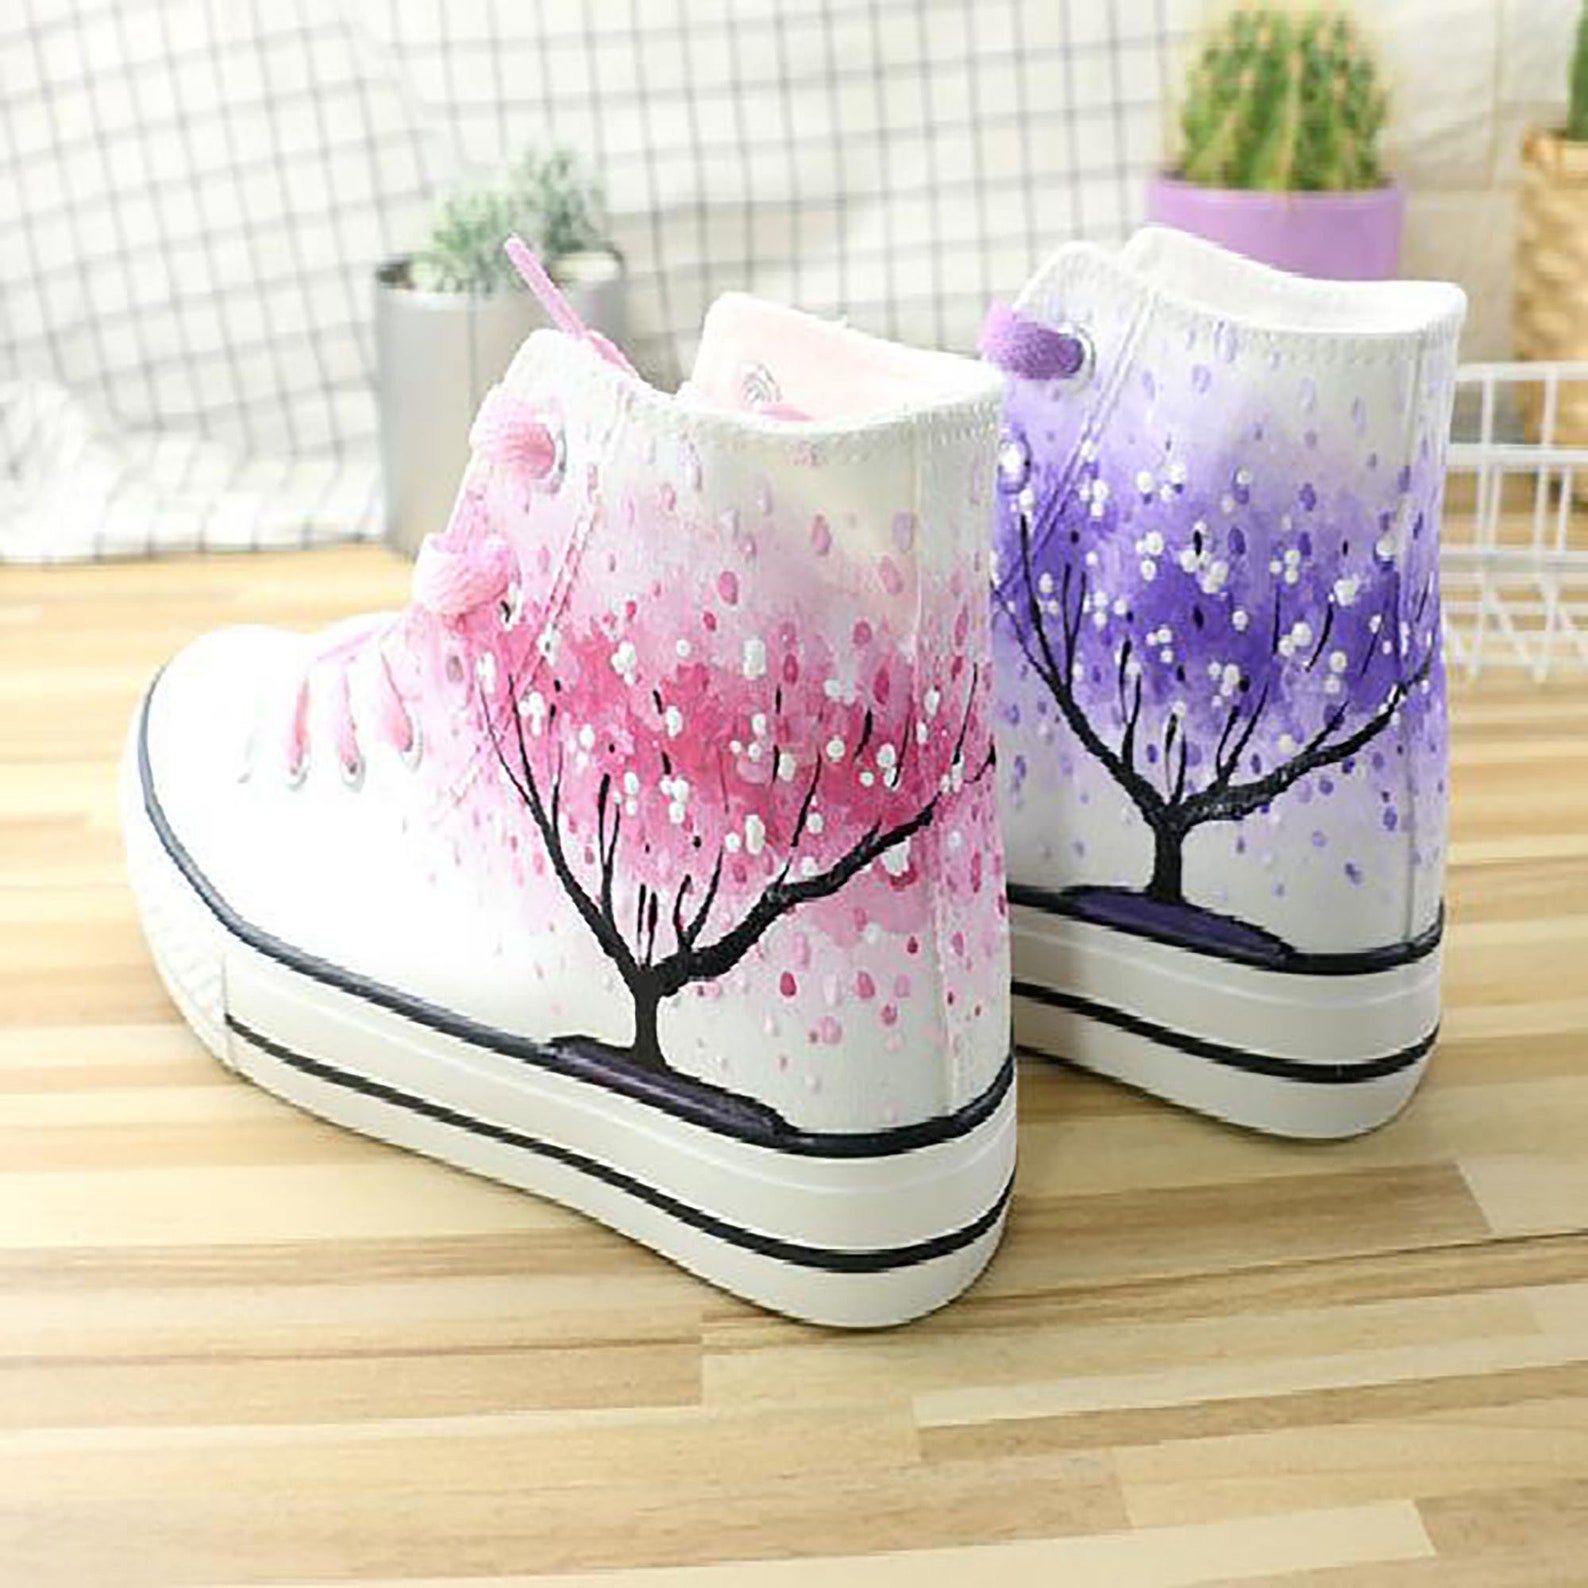 Personality Design Shoes Birthday Gifts Casual Lace - Etsy